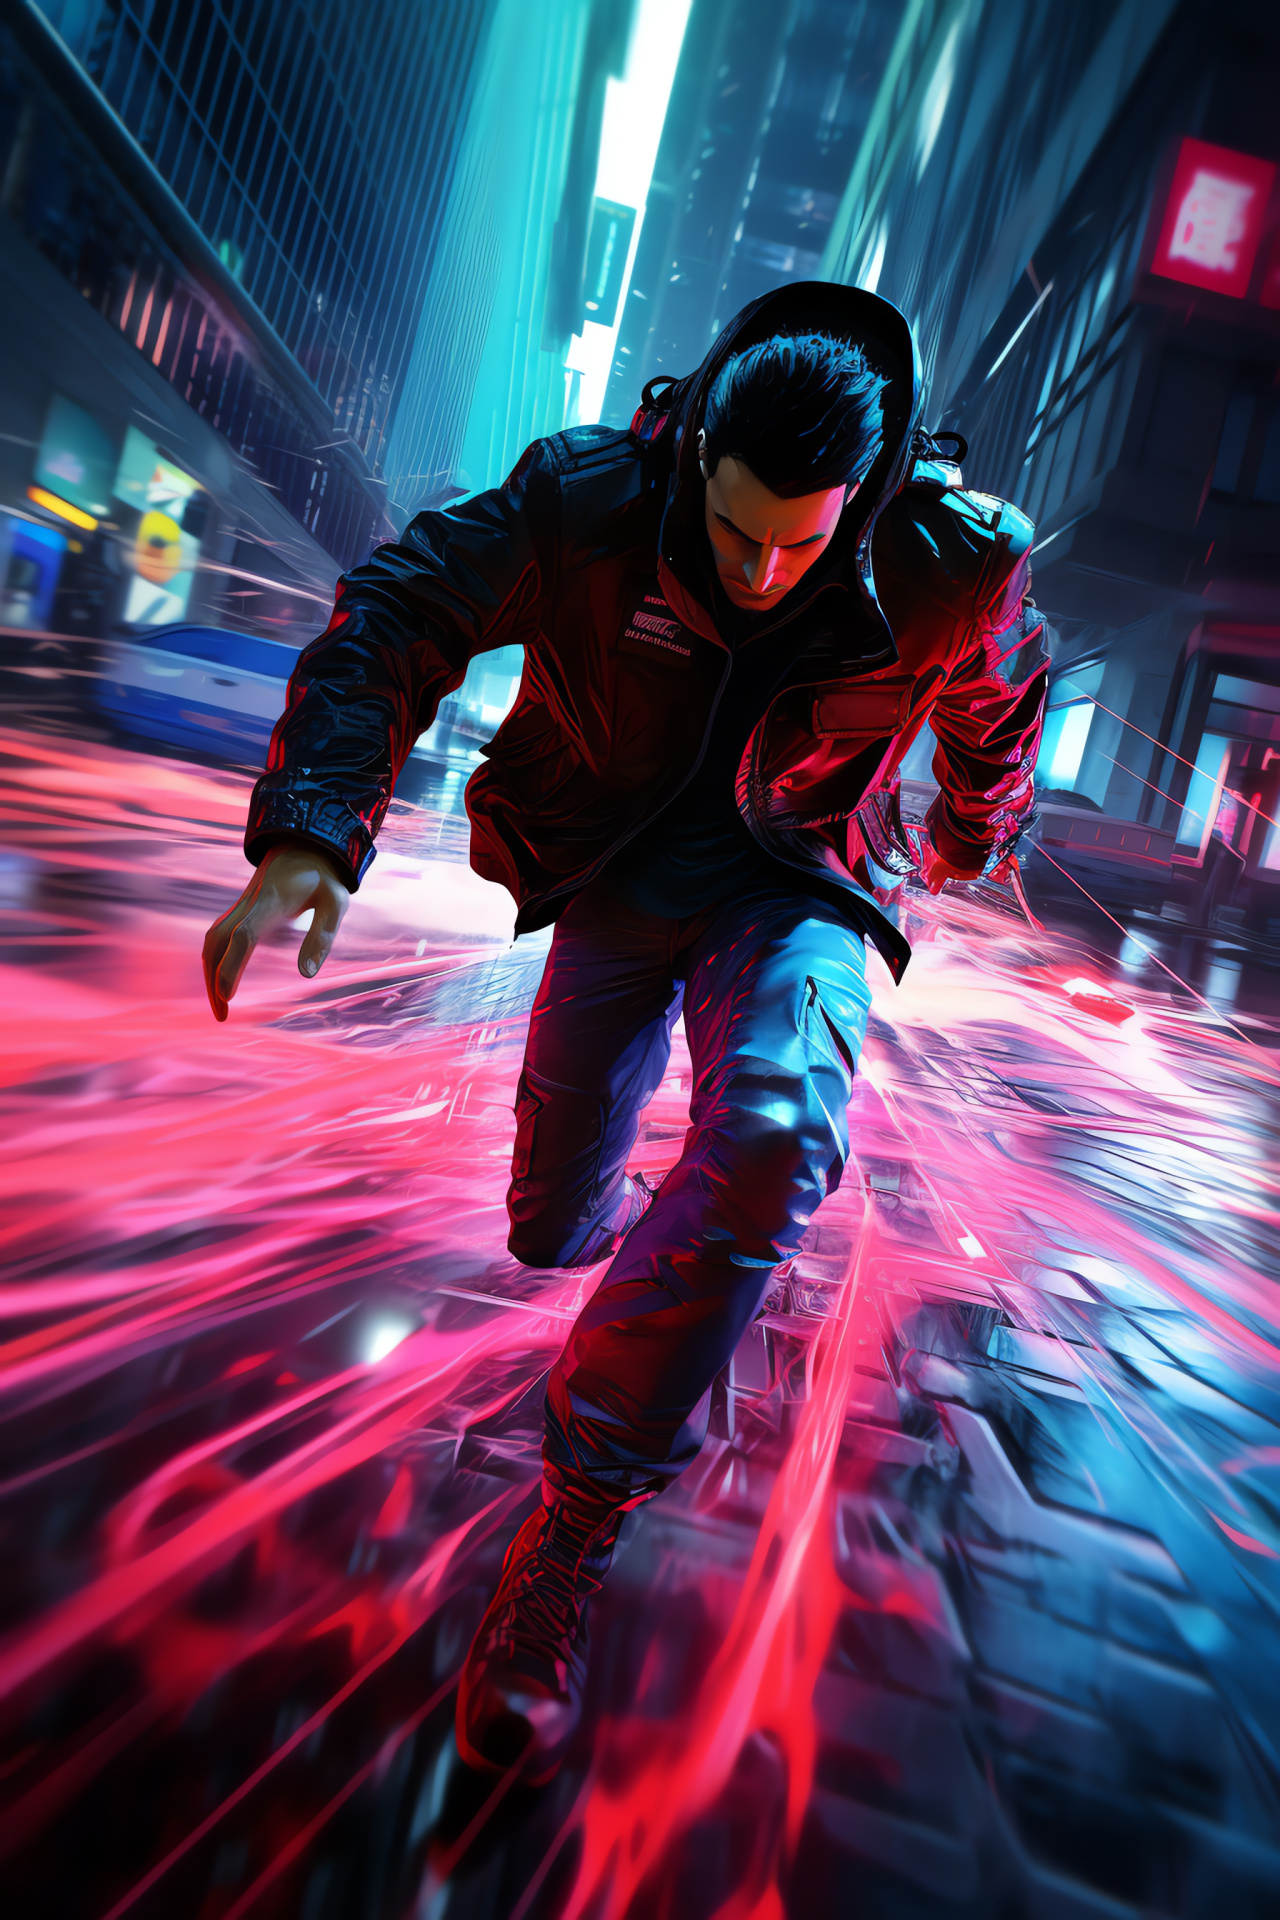 Prototype 2 game, Urban chase, Advanced superpowers, Dark atmosphere, Gaming experience, HD Phone Image